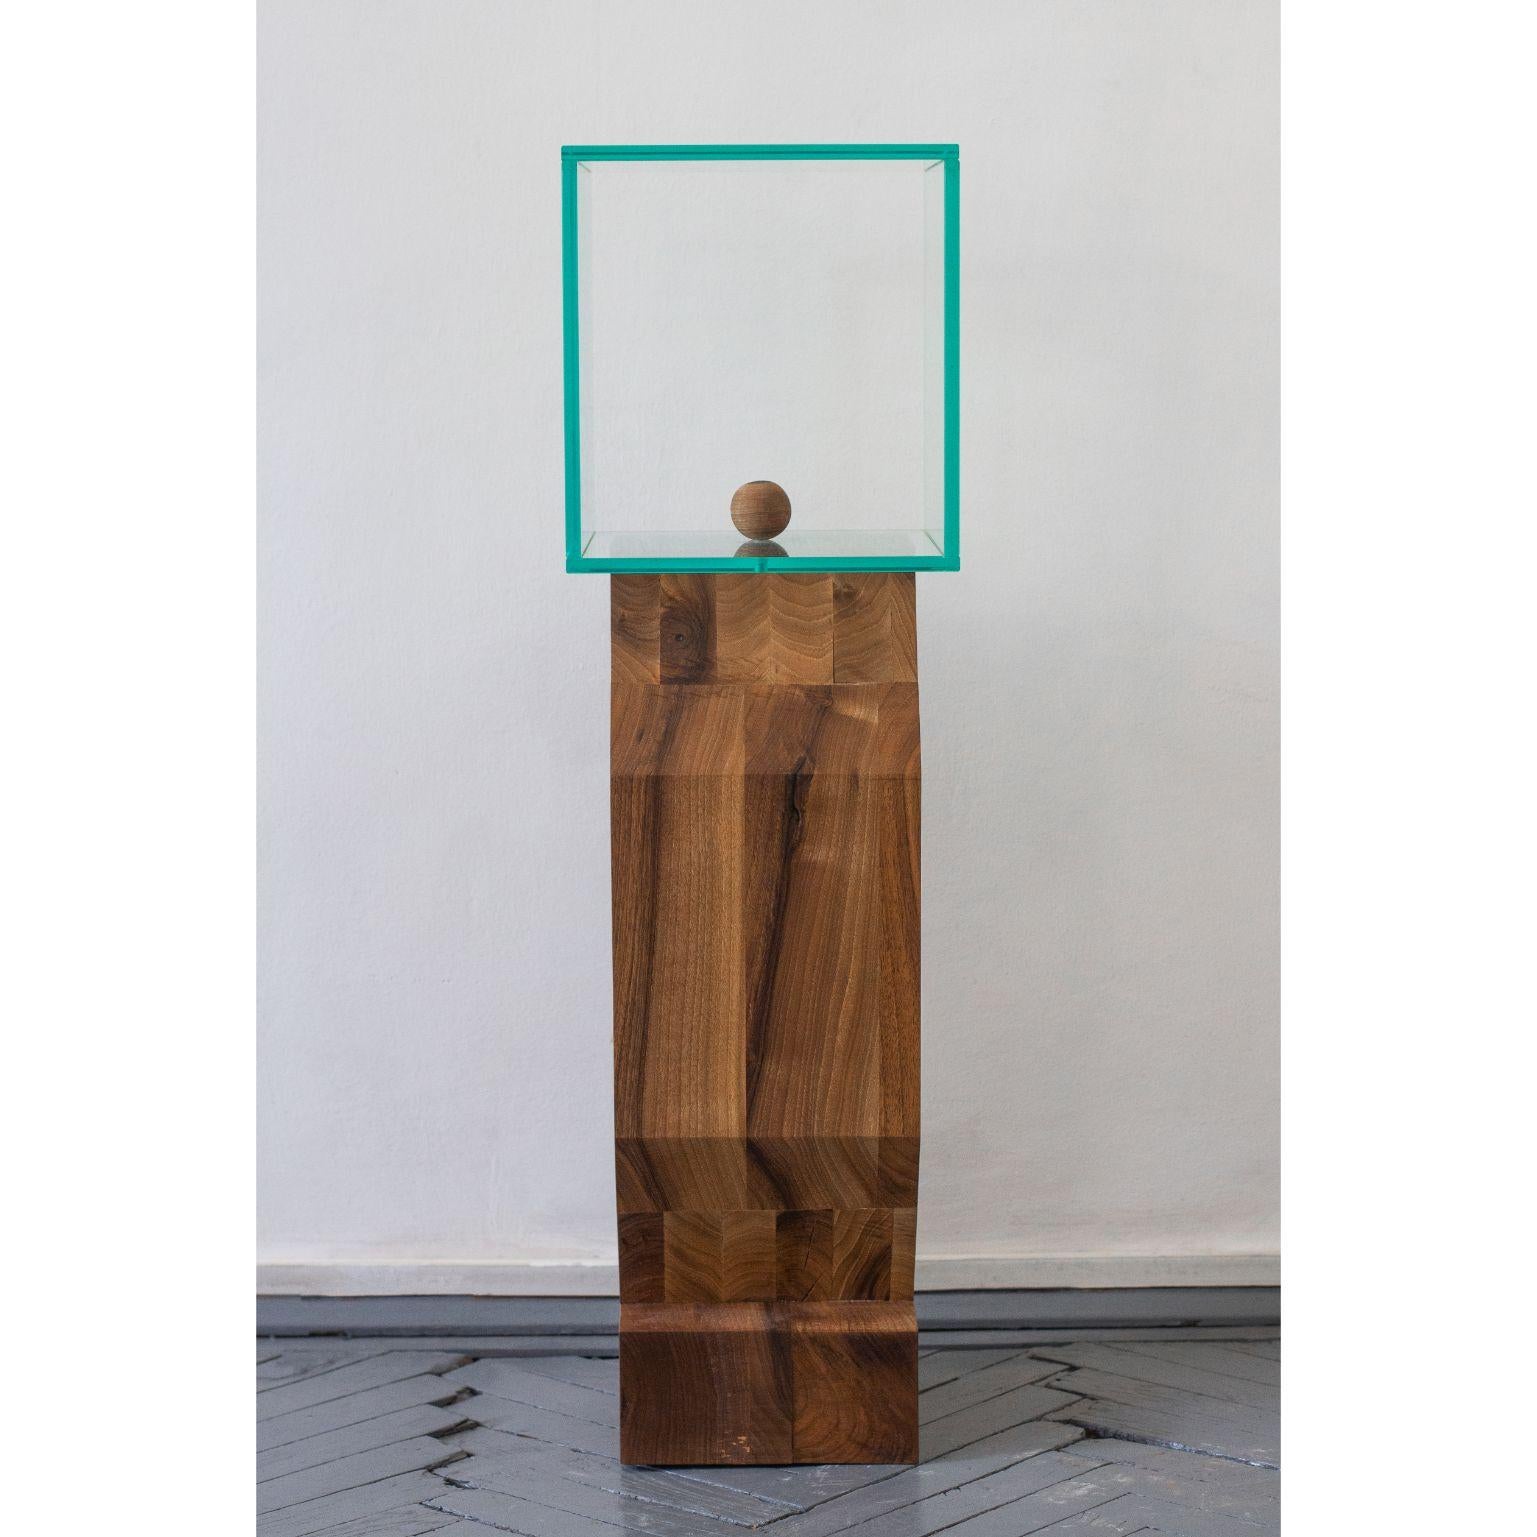 Wood figure with glass head by Radu Abraham
Limited Edition of 10
Materials: Walnut wood, glass
Dimensions: 25 x 25 x 87 cm

A massive block of walnut wood, glued together in shape then cut directly in block for getting the wanted shape. On